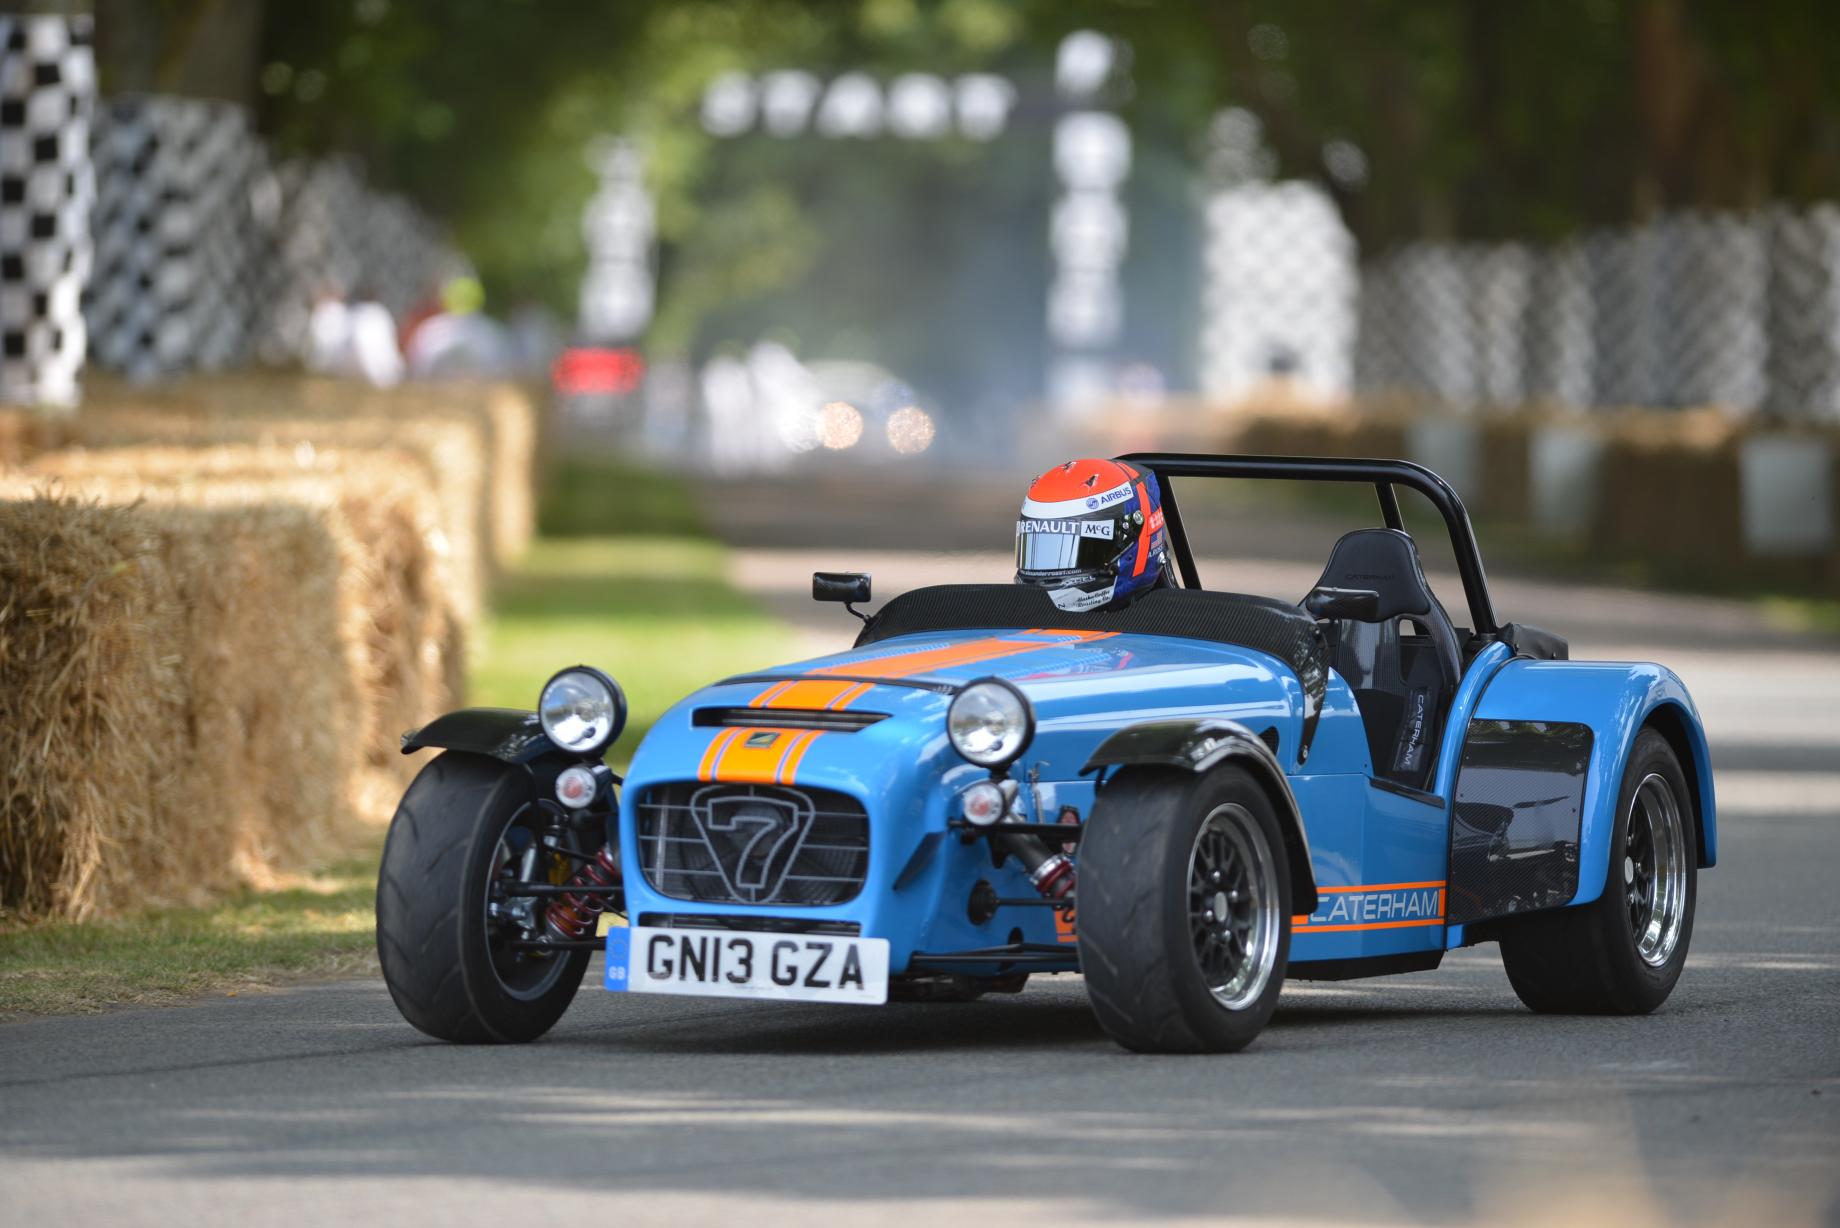 Caterham Seven 620 R Backgrounds on Wallpapers Vista